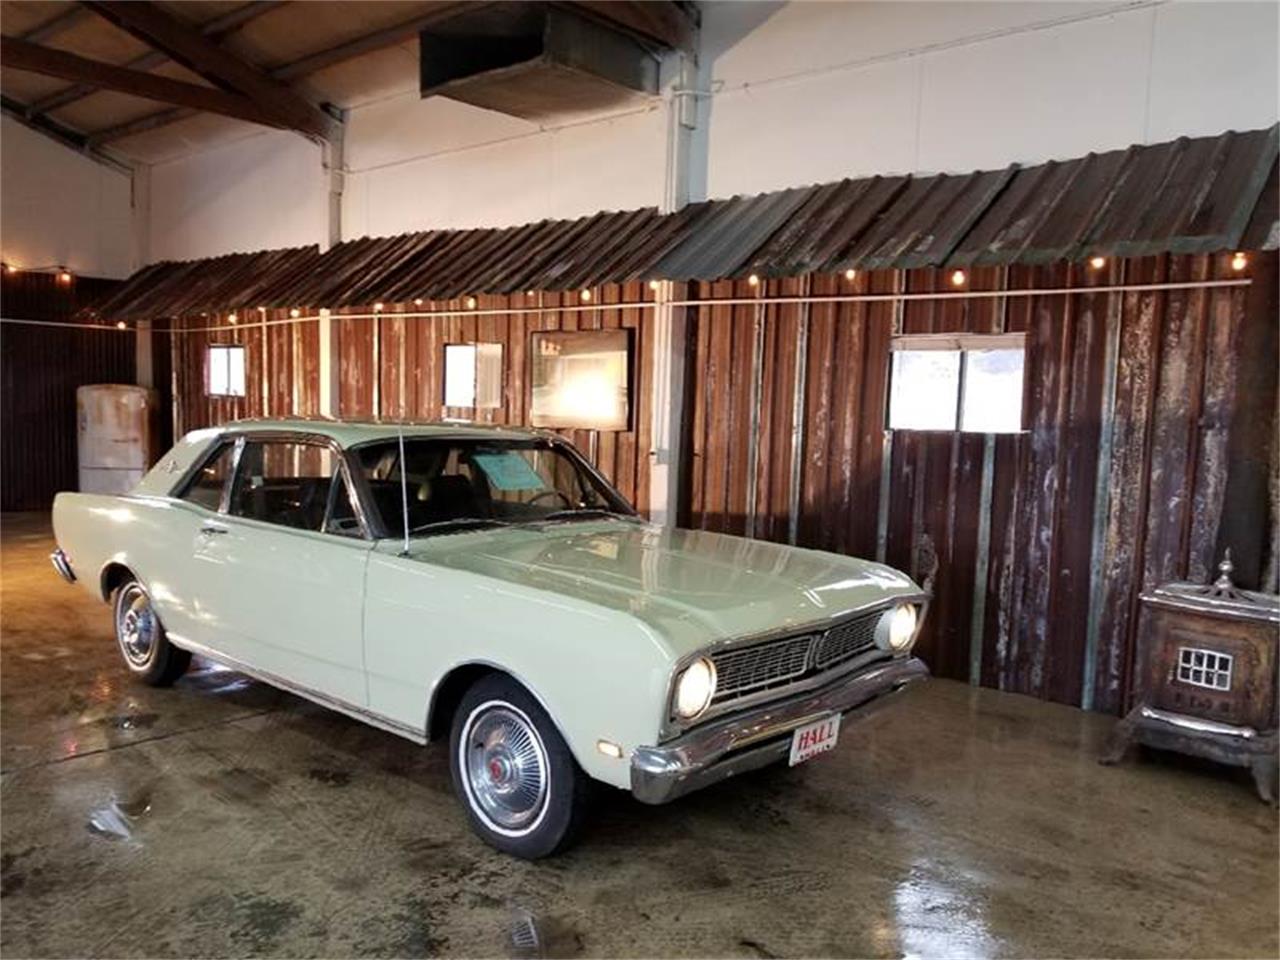 1969 ford falcon for sale classiccars com cc 1072194 1969 ford falcon for sale classiccars